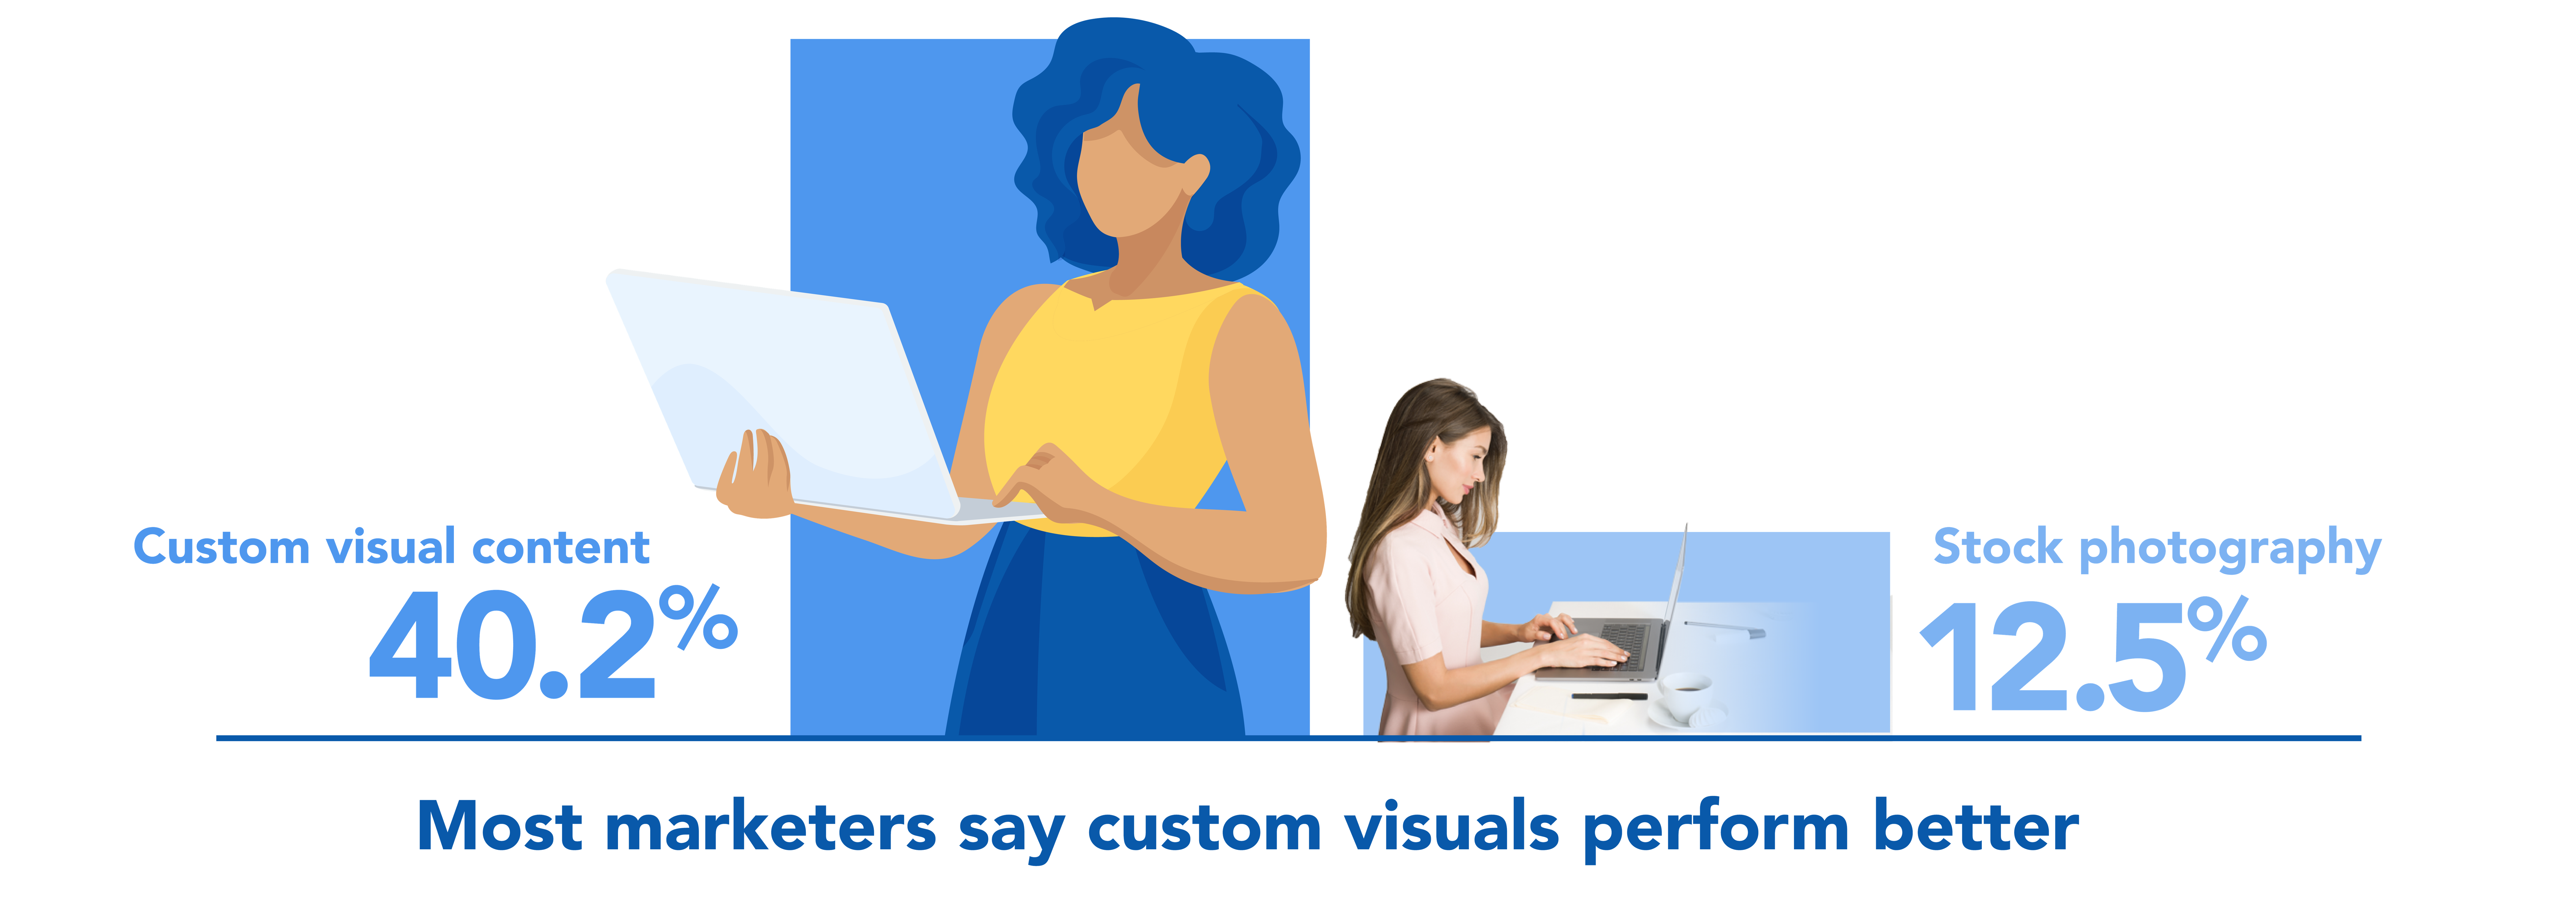 An illustrated graphic stating that 40.2% of marketers say custom visual content performs better than stock photography, with an illustrated marketer standing back to back with a stock photo marketer